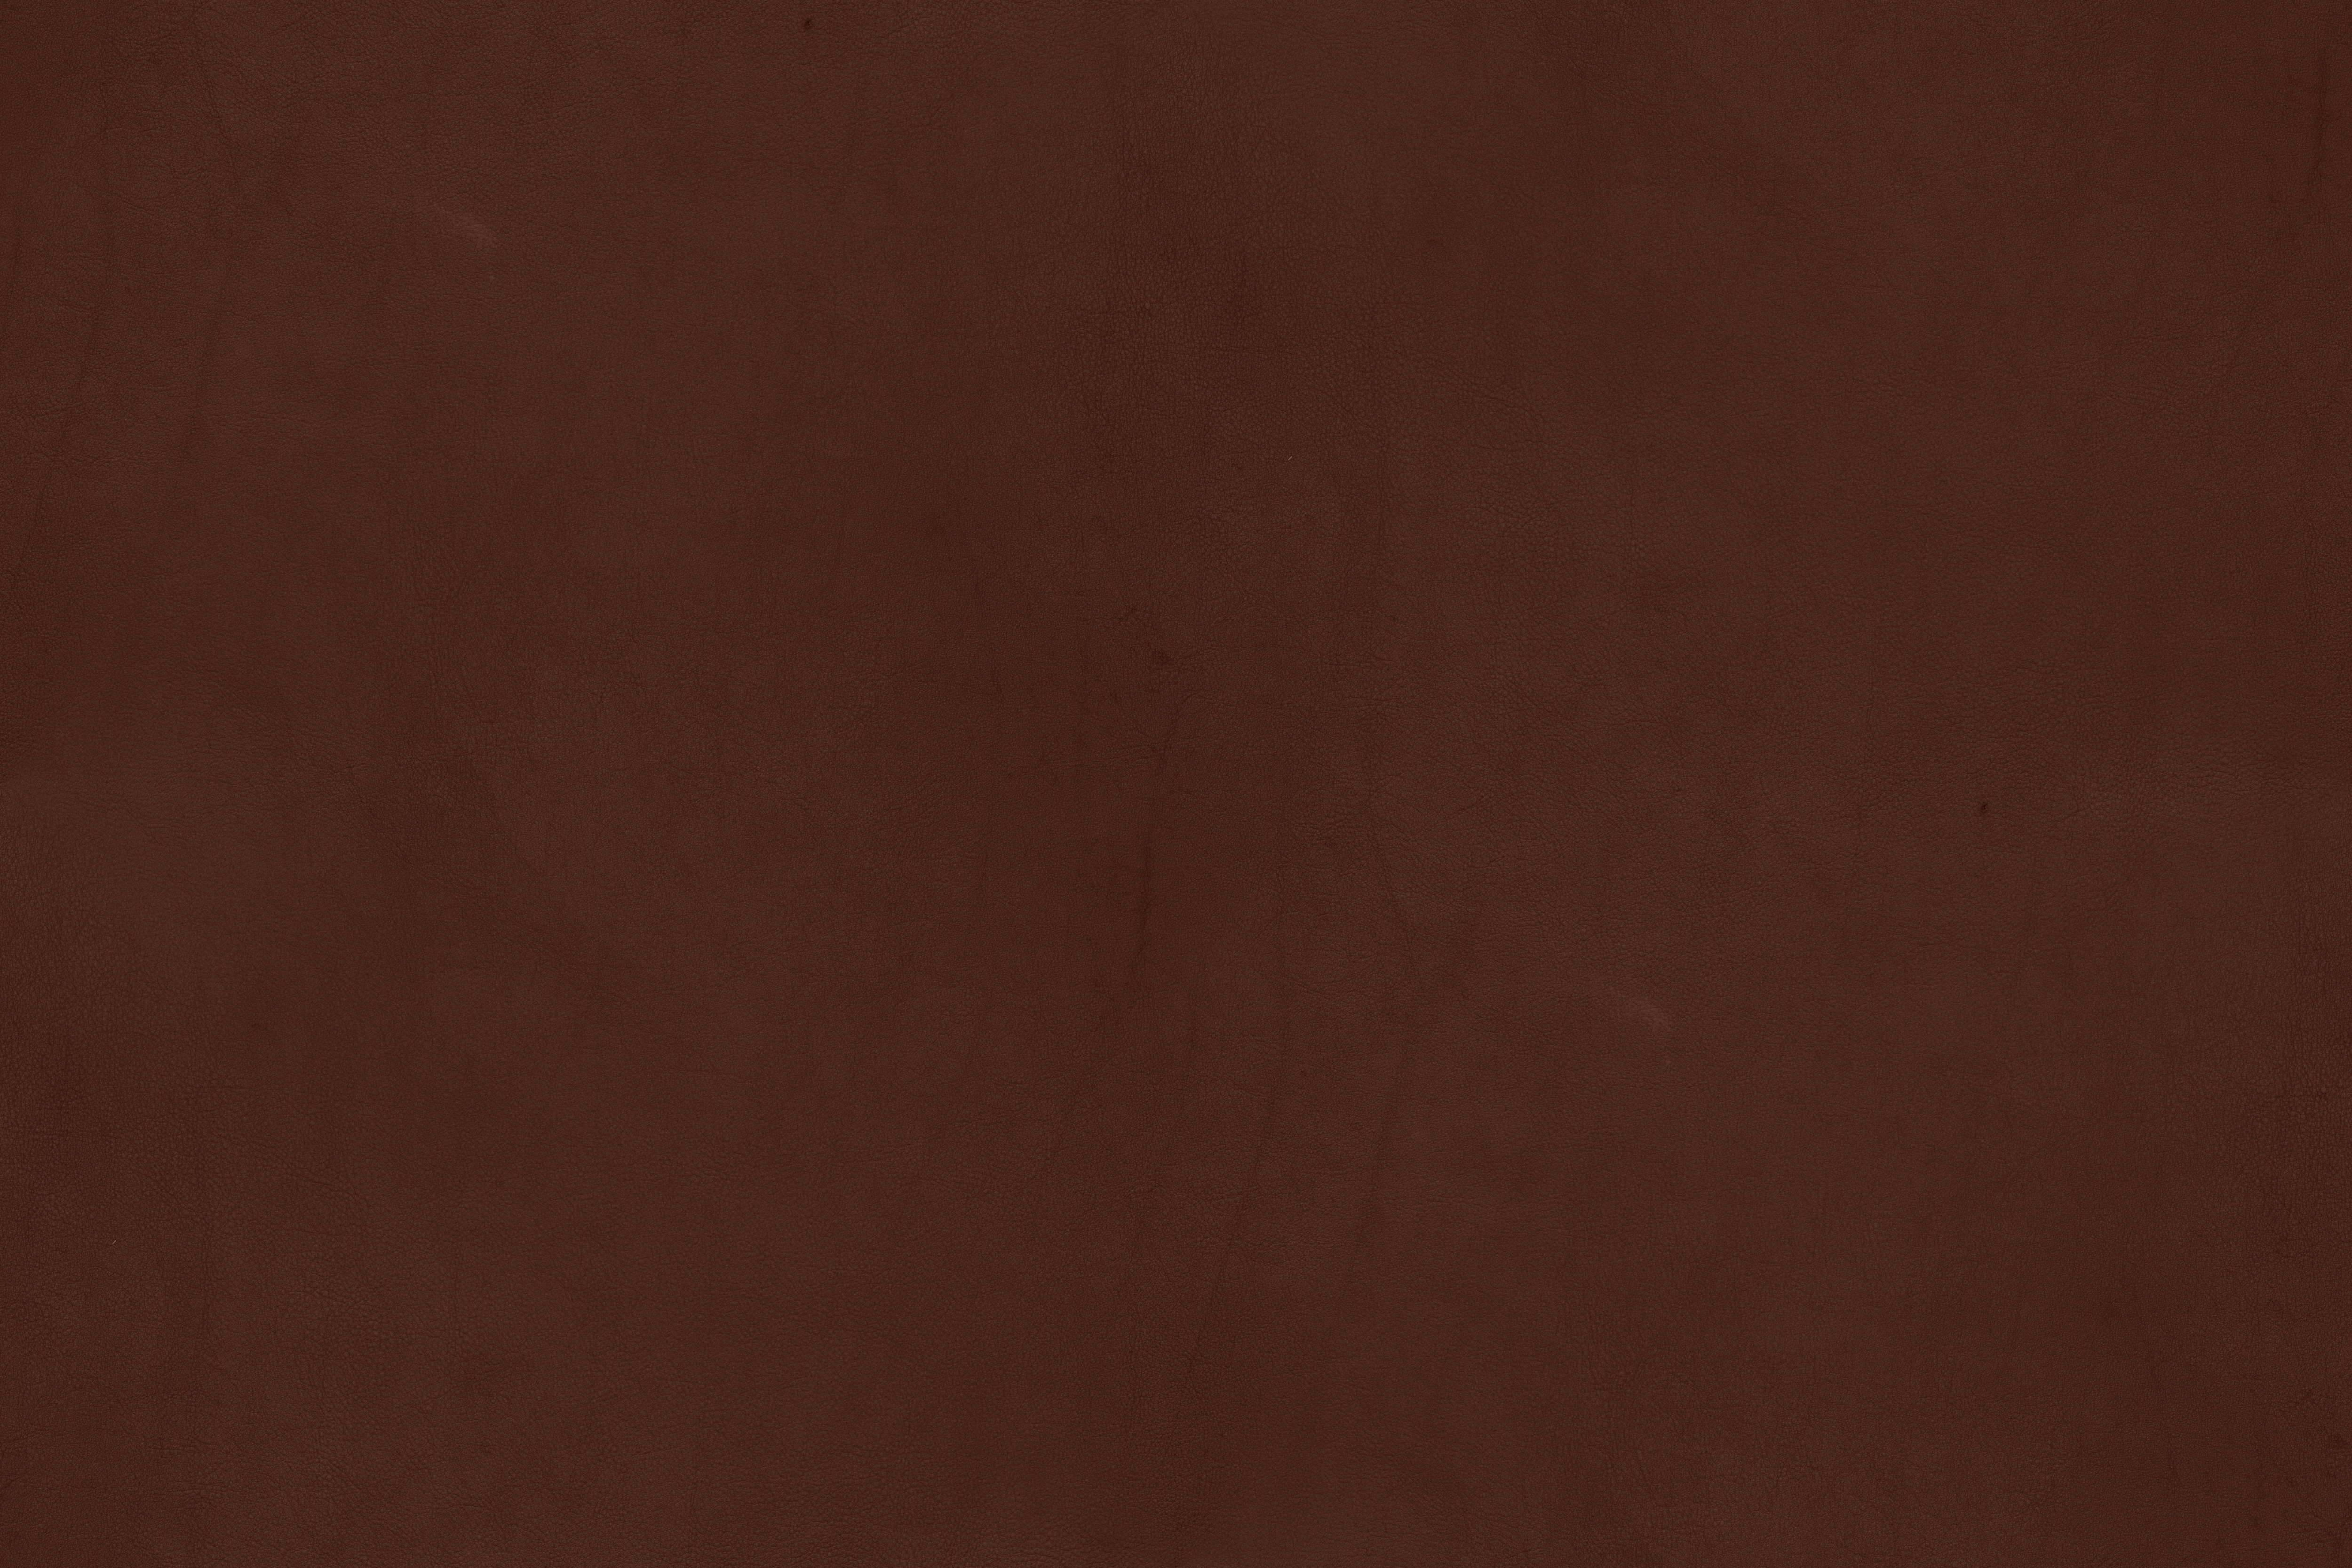 Brown Backgrounds, Compatible - PC, Mobile, Gadgets| 5000x3333 px